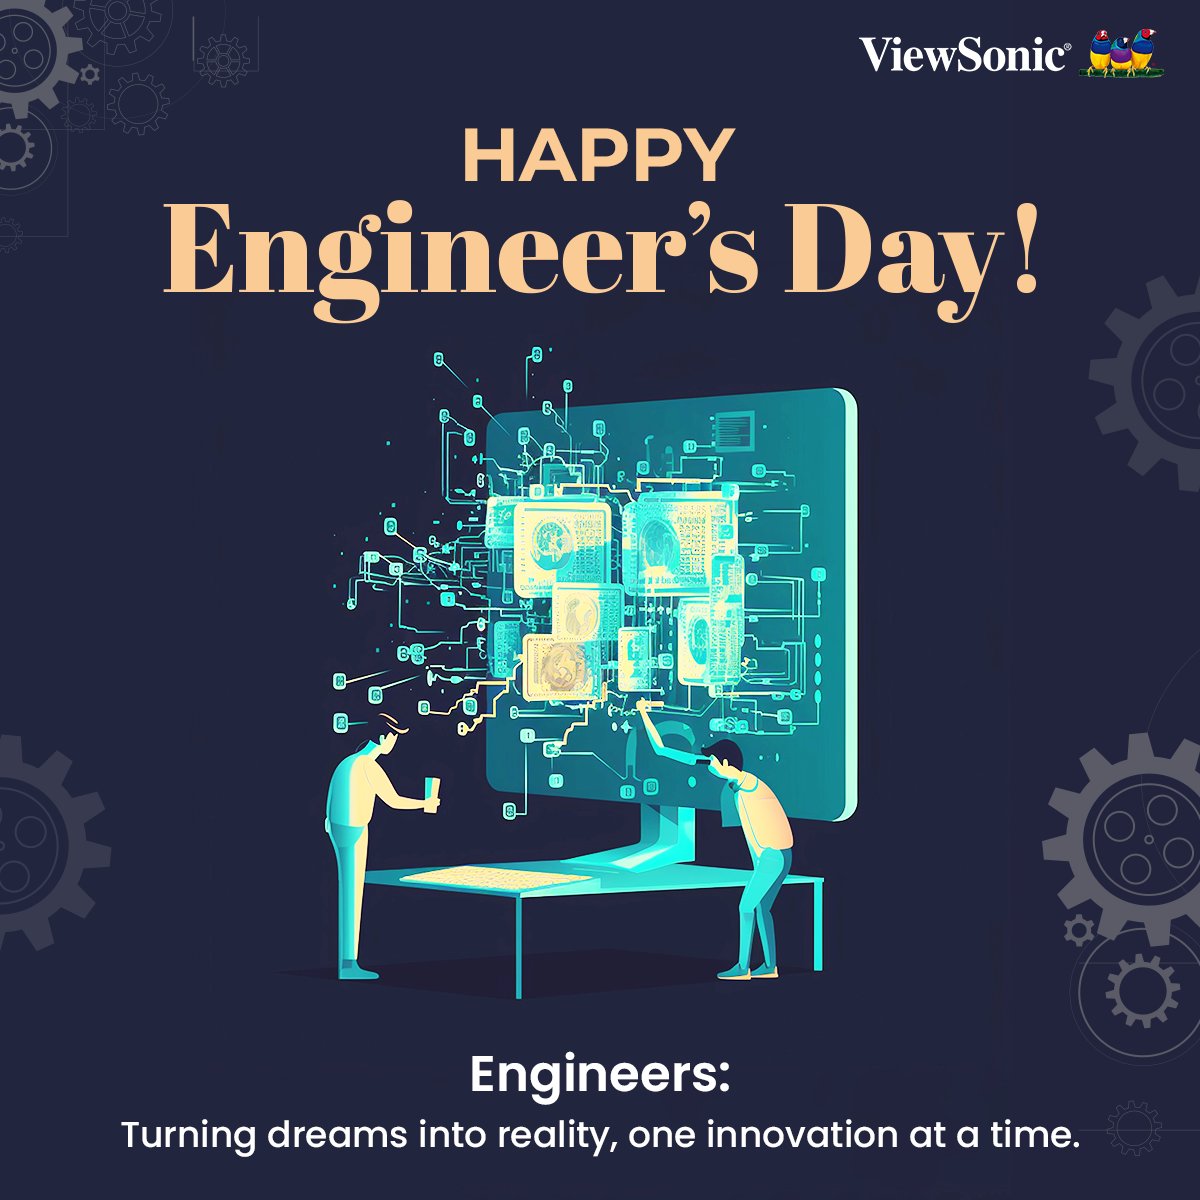 Happy Engineer's Day! 🎉 Today, let's honor the creators of innovation and technology. At ViewSonic, we acknowledge the hardwork that our engineers put in bringing dreams to life, one breakthrough at a time!

#ViewSonic #ViewSonicIndia #futuretechnology #instatech #avtechlife